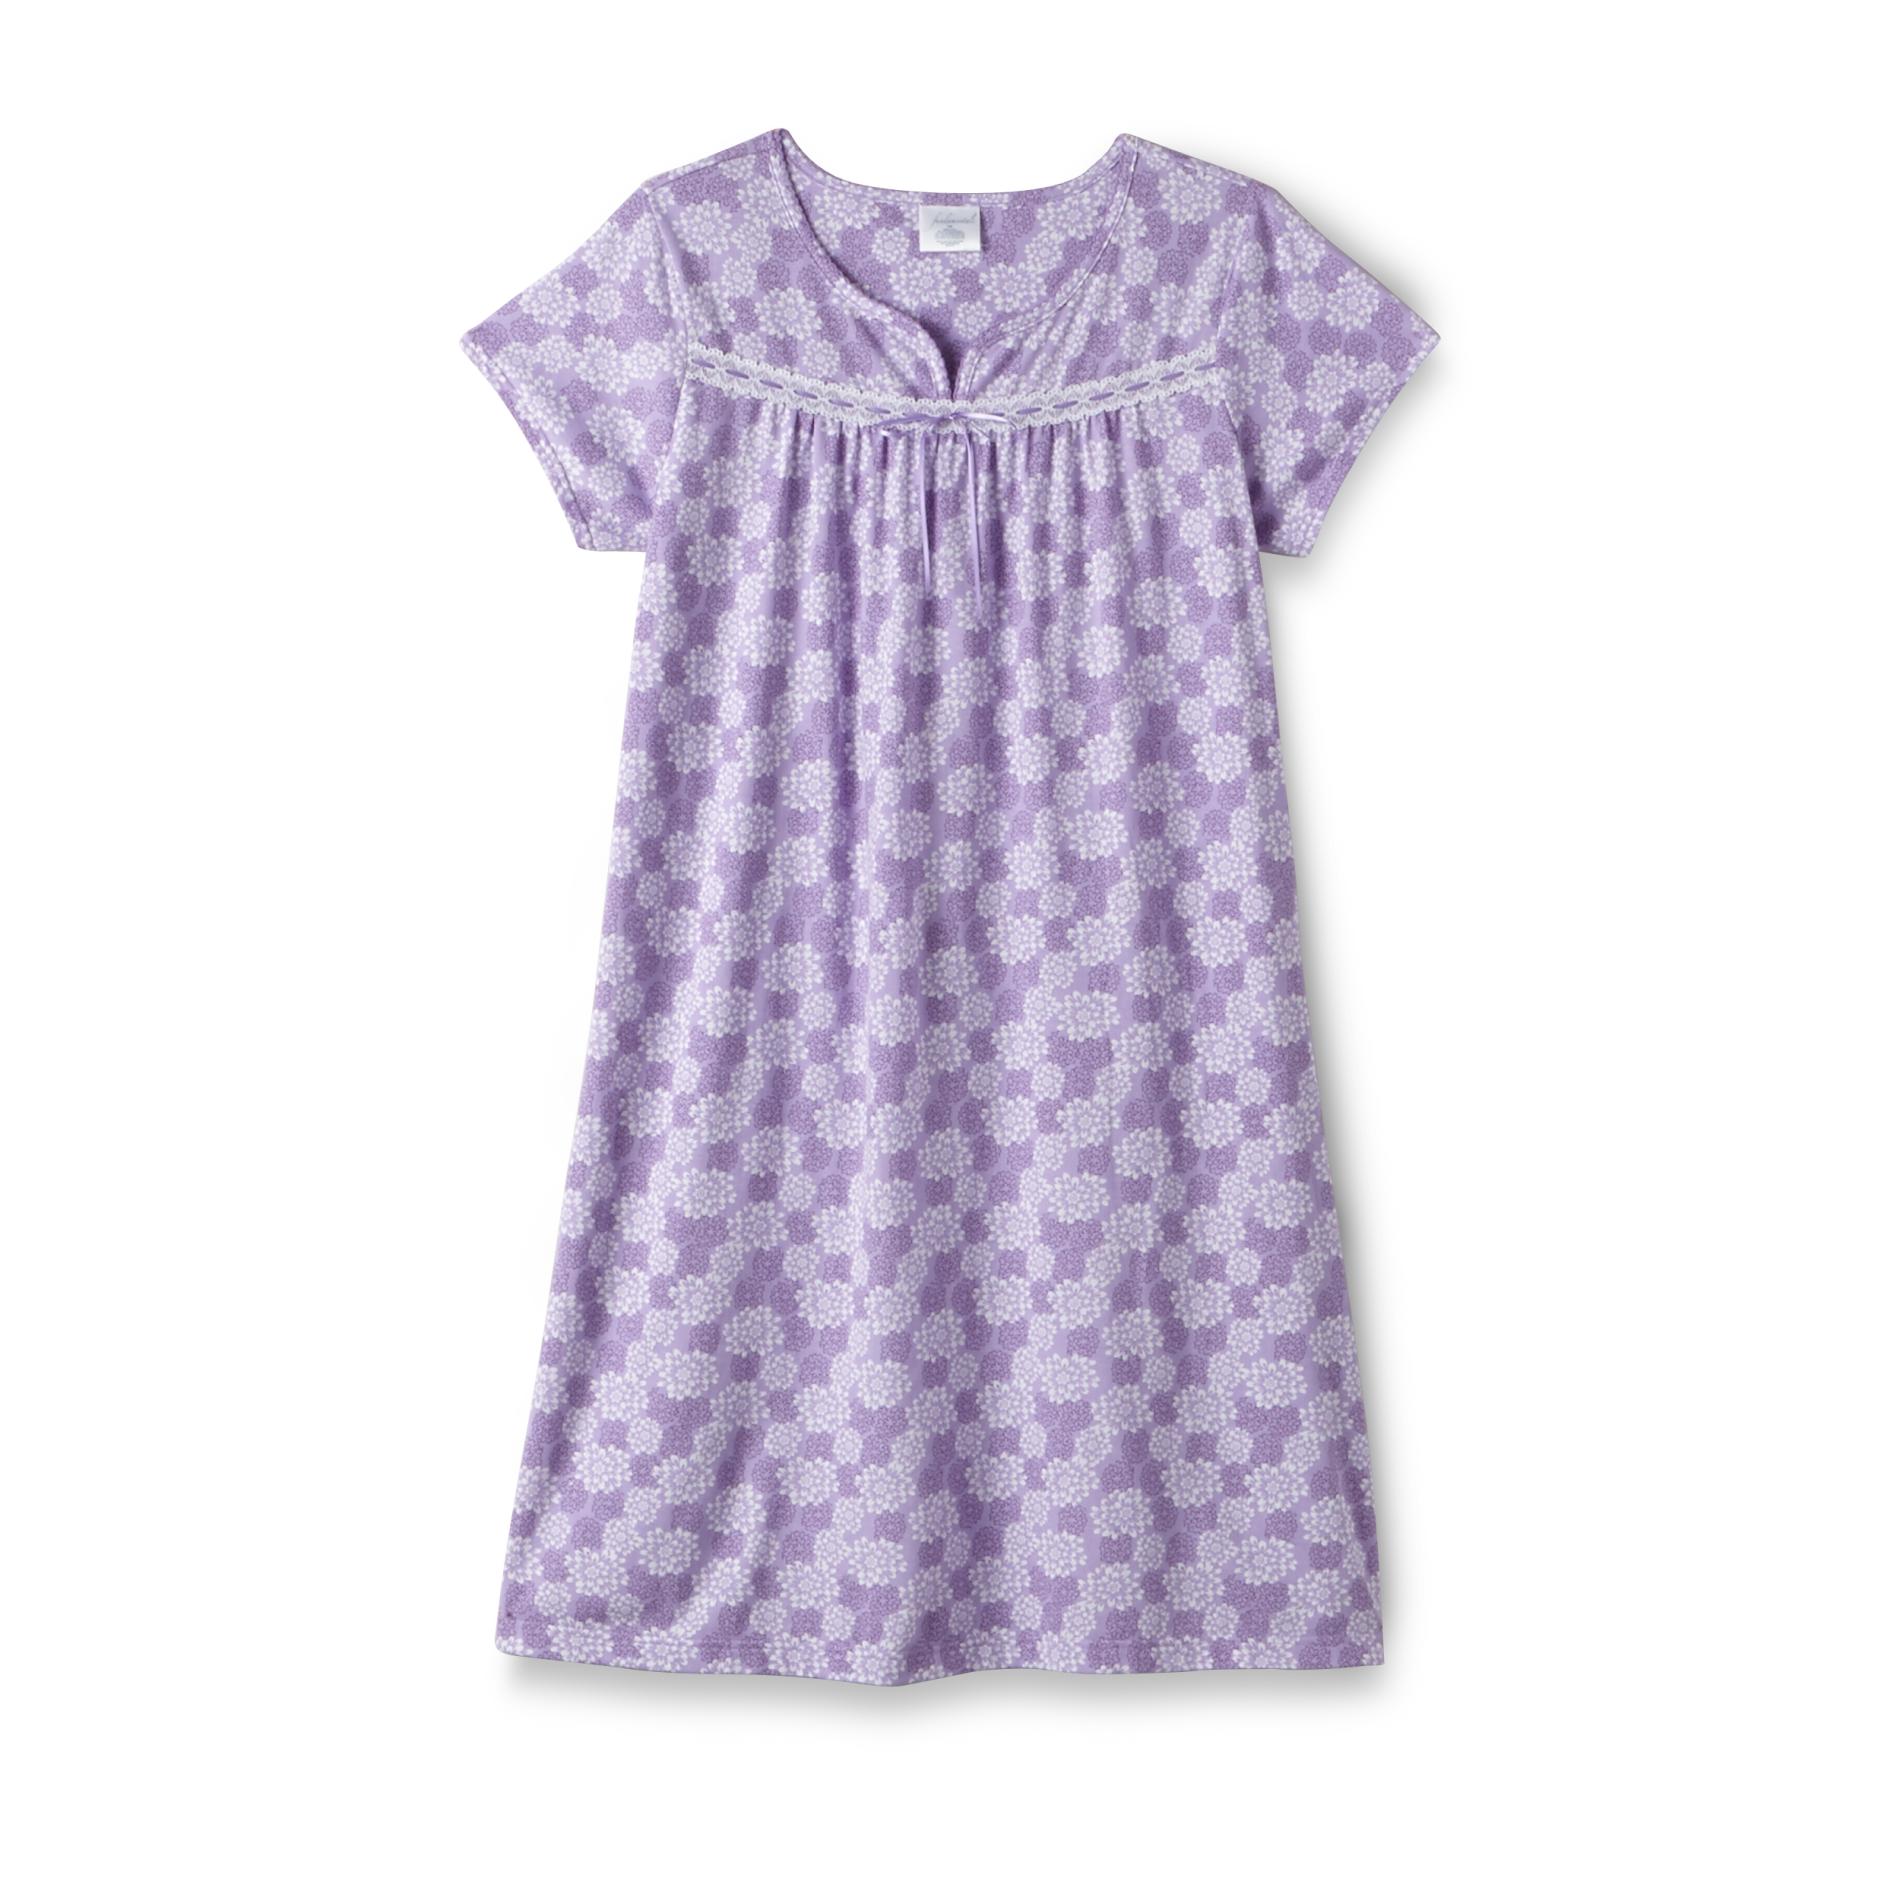 Fundamentals Women's Knit Nightgown - Floral